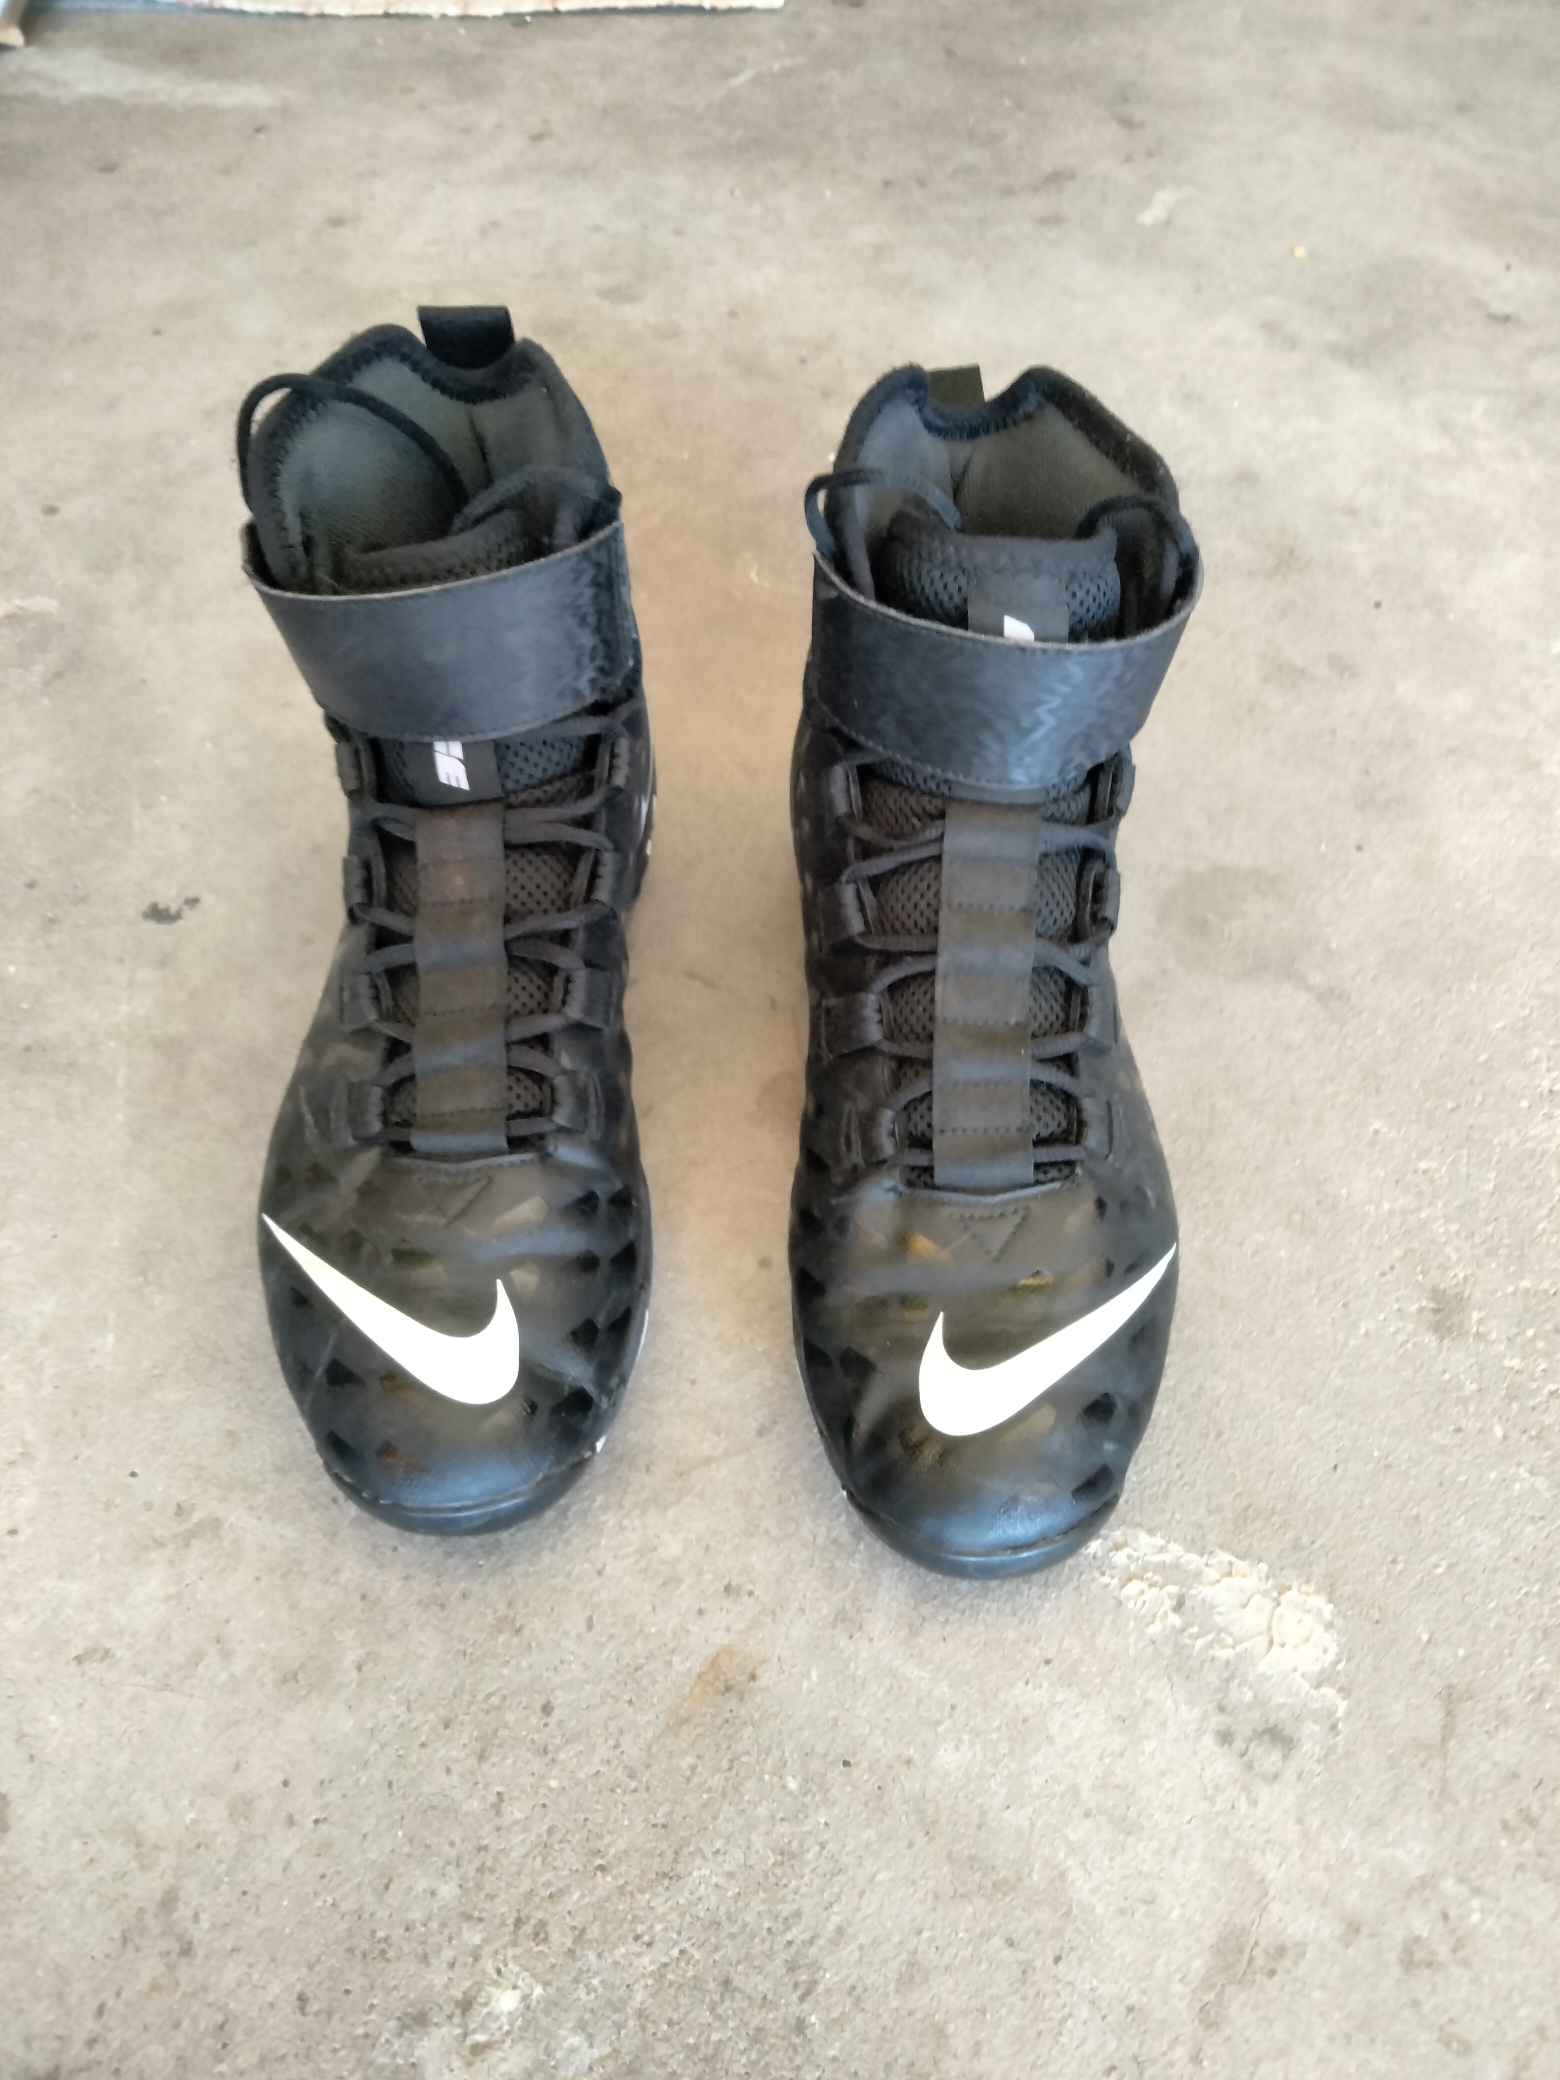 Used Unisex Size 12 (Women's 13) Molded Cleats Nike High Top Force